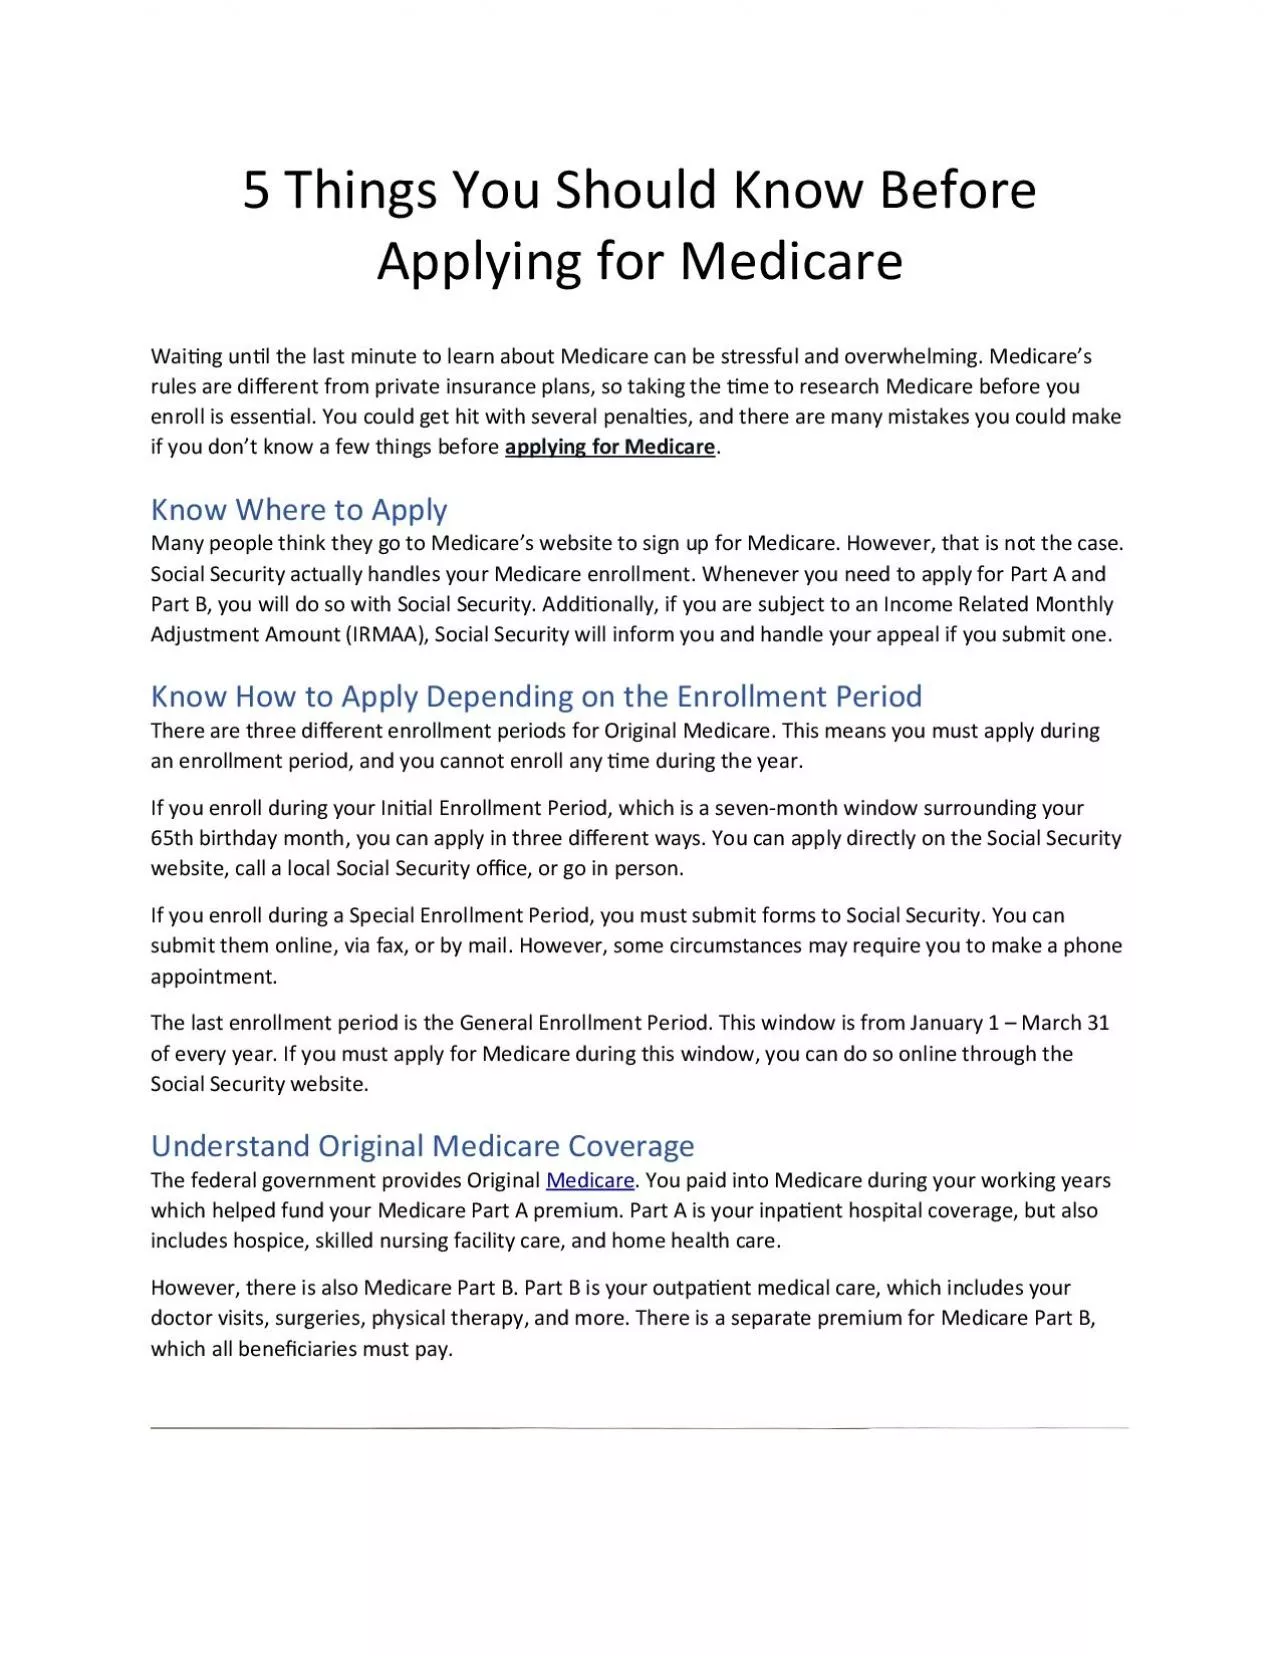 5 Things You Should Know Before Applying for Medicare